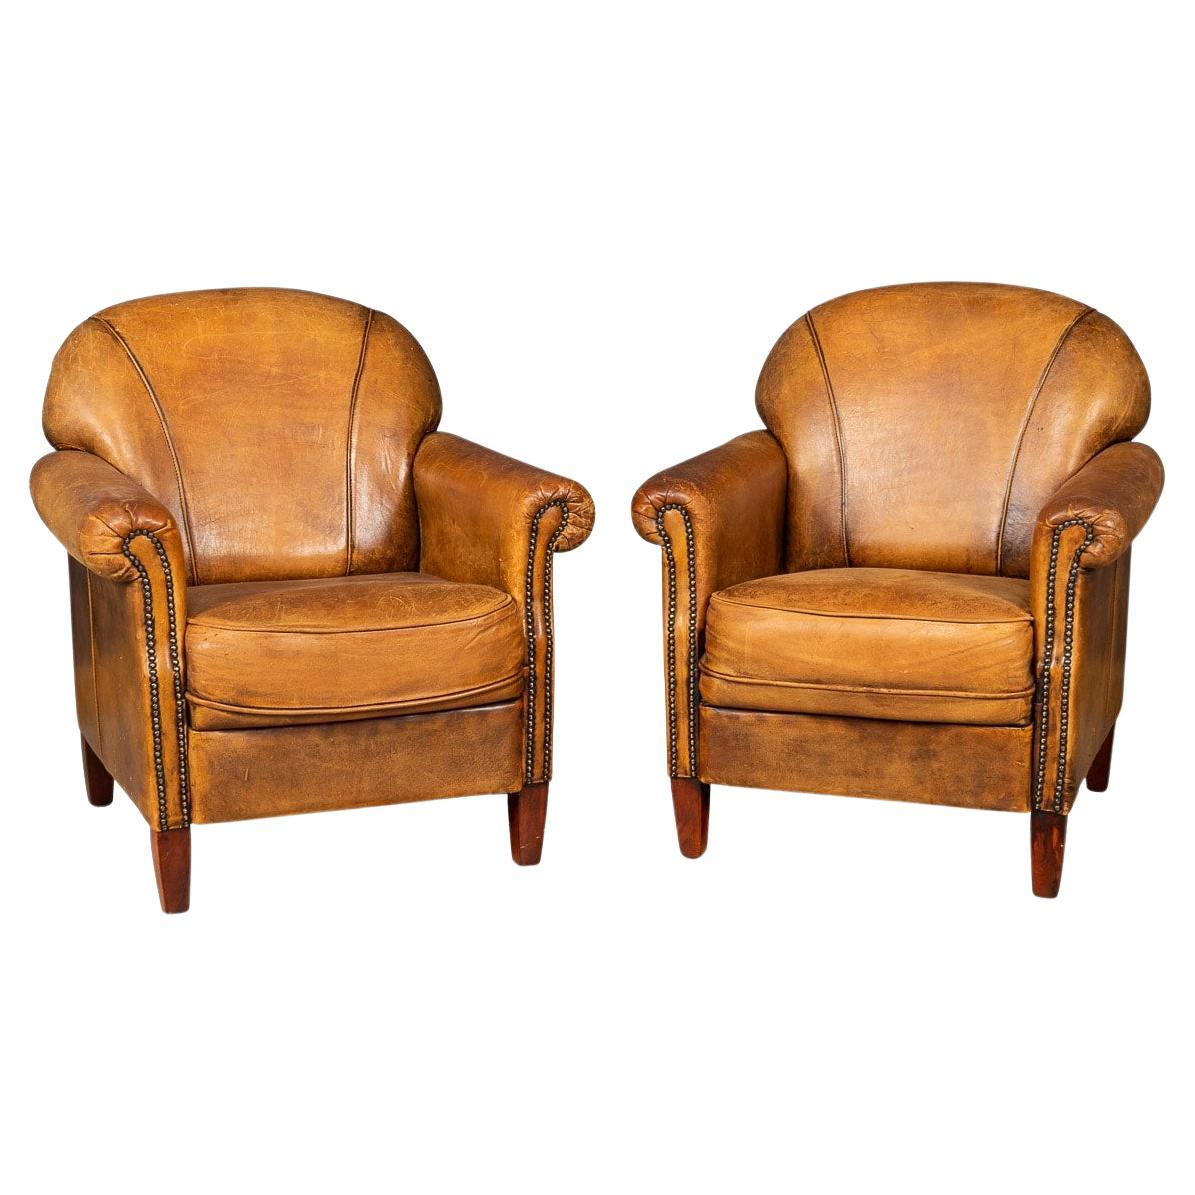 How old are tub chairs?